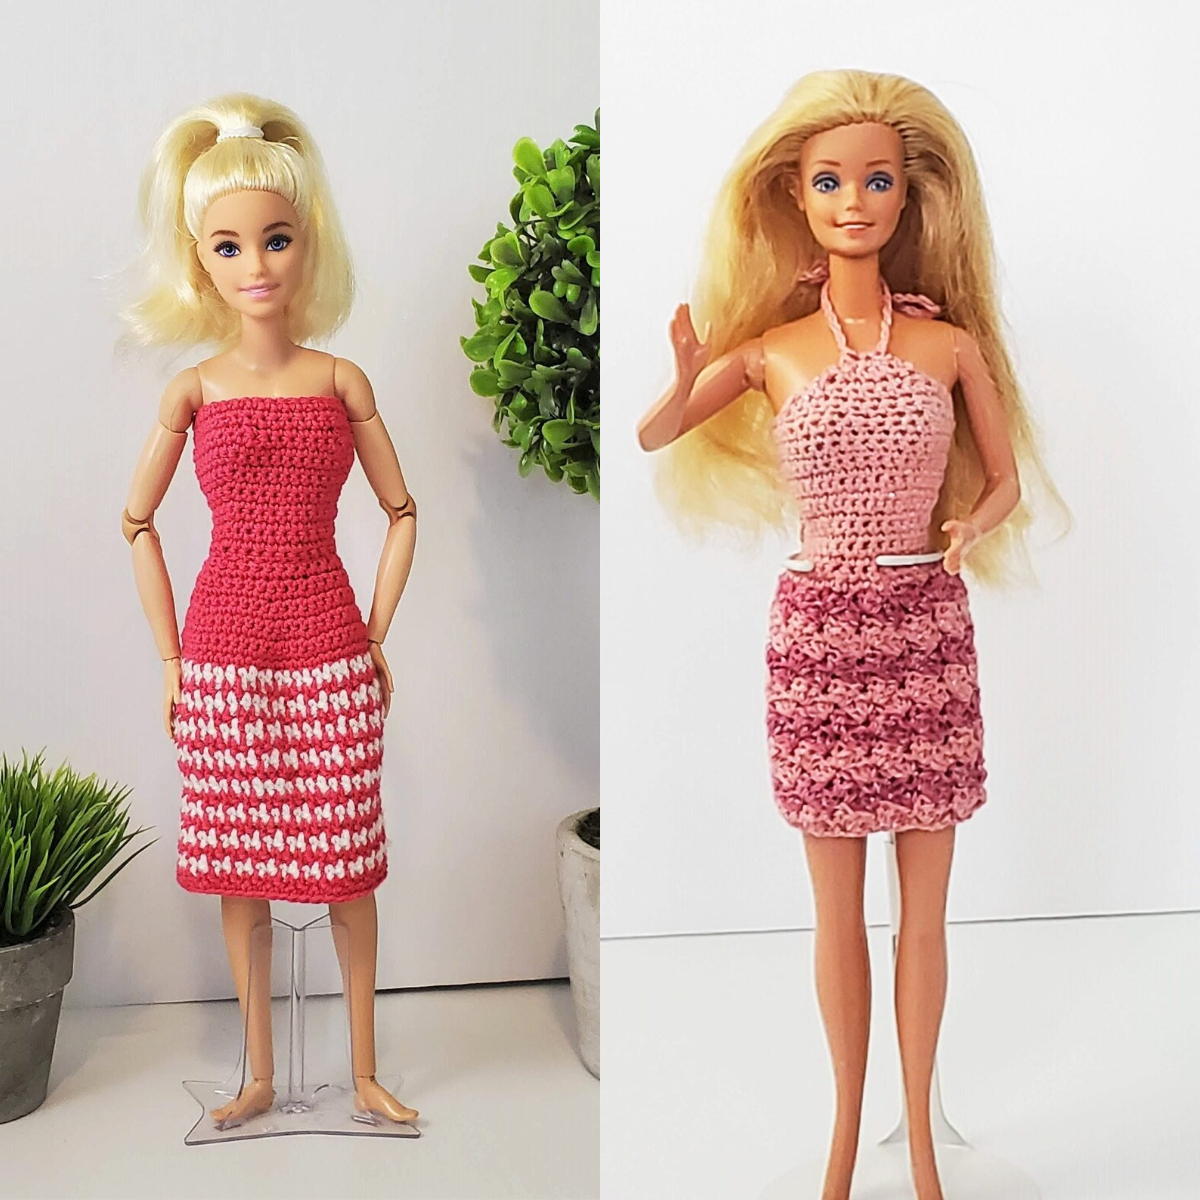 Crocheted dresses on Barbies 